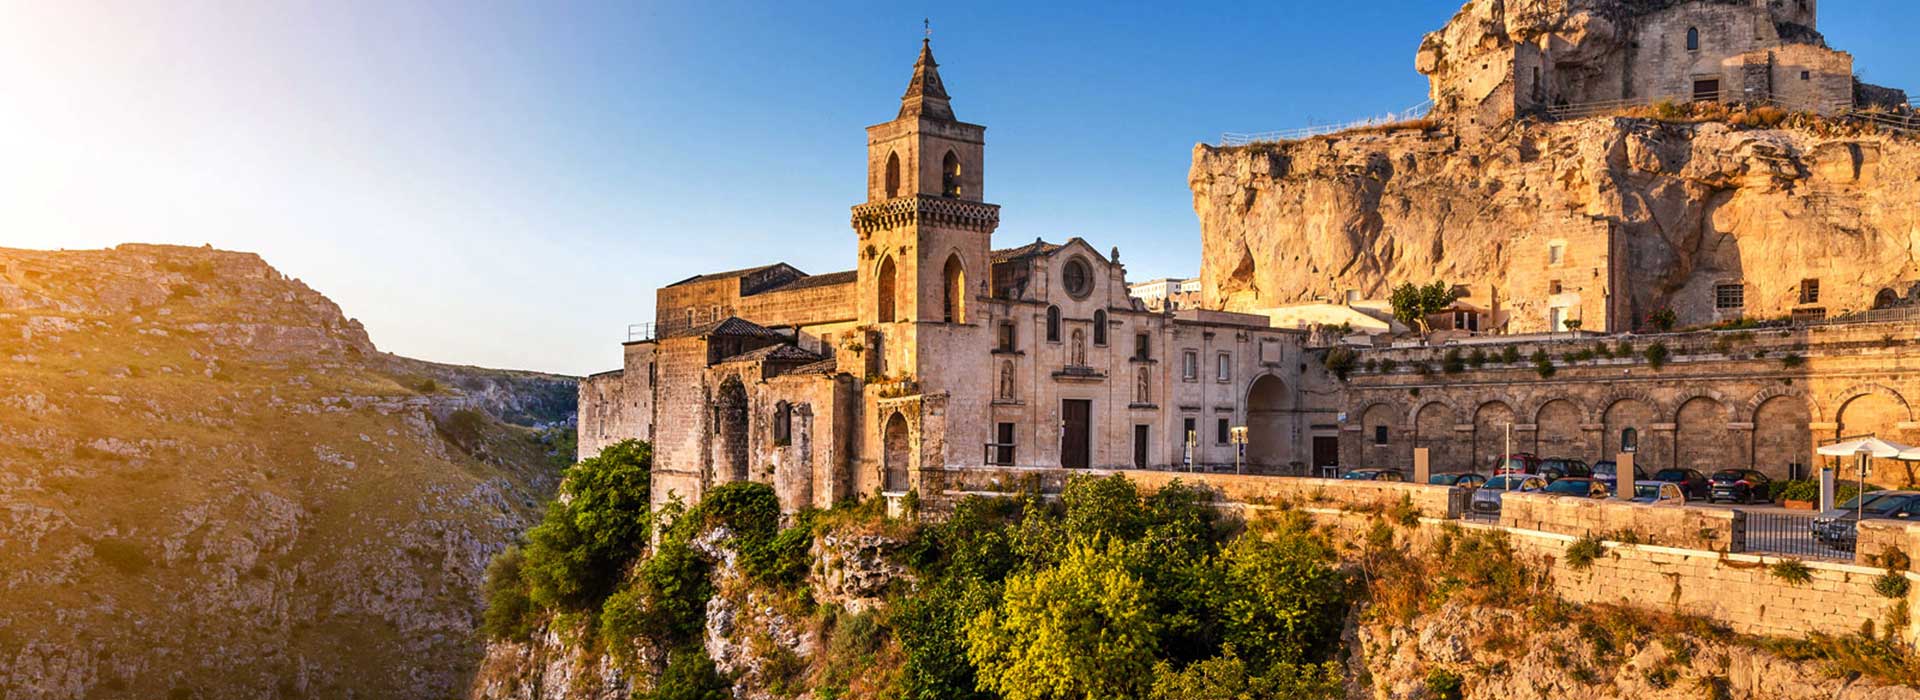 View of church on mountain, Matera, Italy